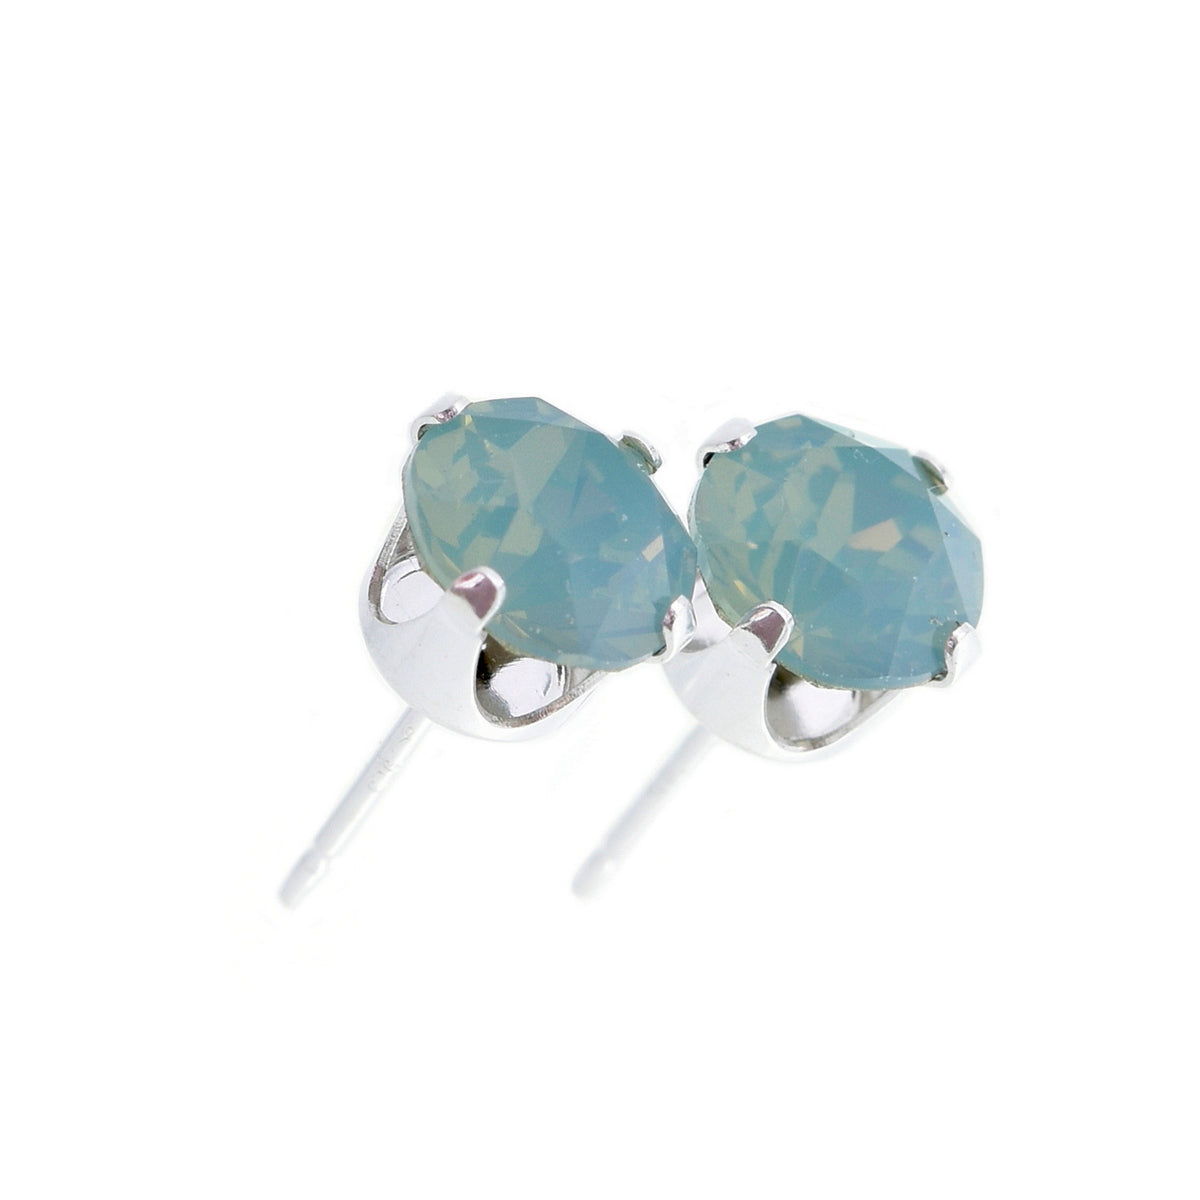 pewterhooter® Women's Classic Collection 925 Sterling silver earrings with sparkling Pacific Opal crystals, packaged in a gift box for any occasion.